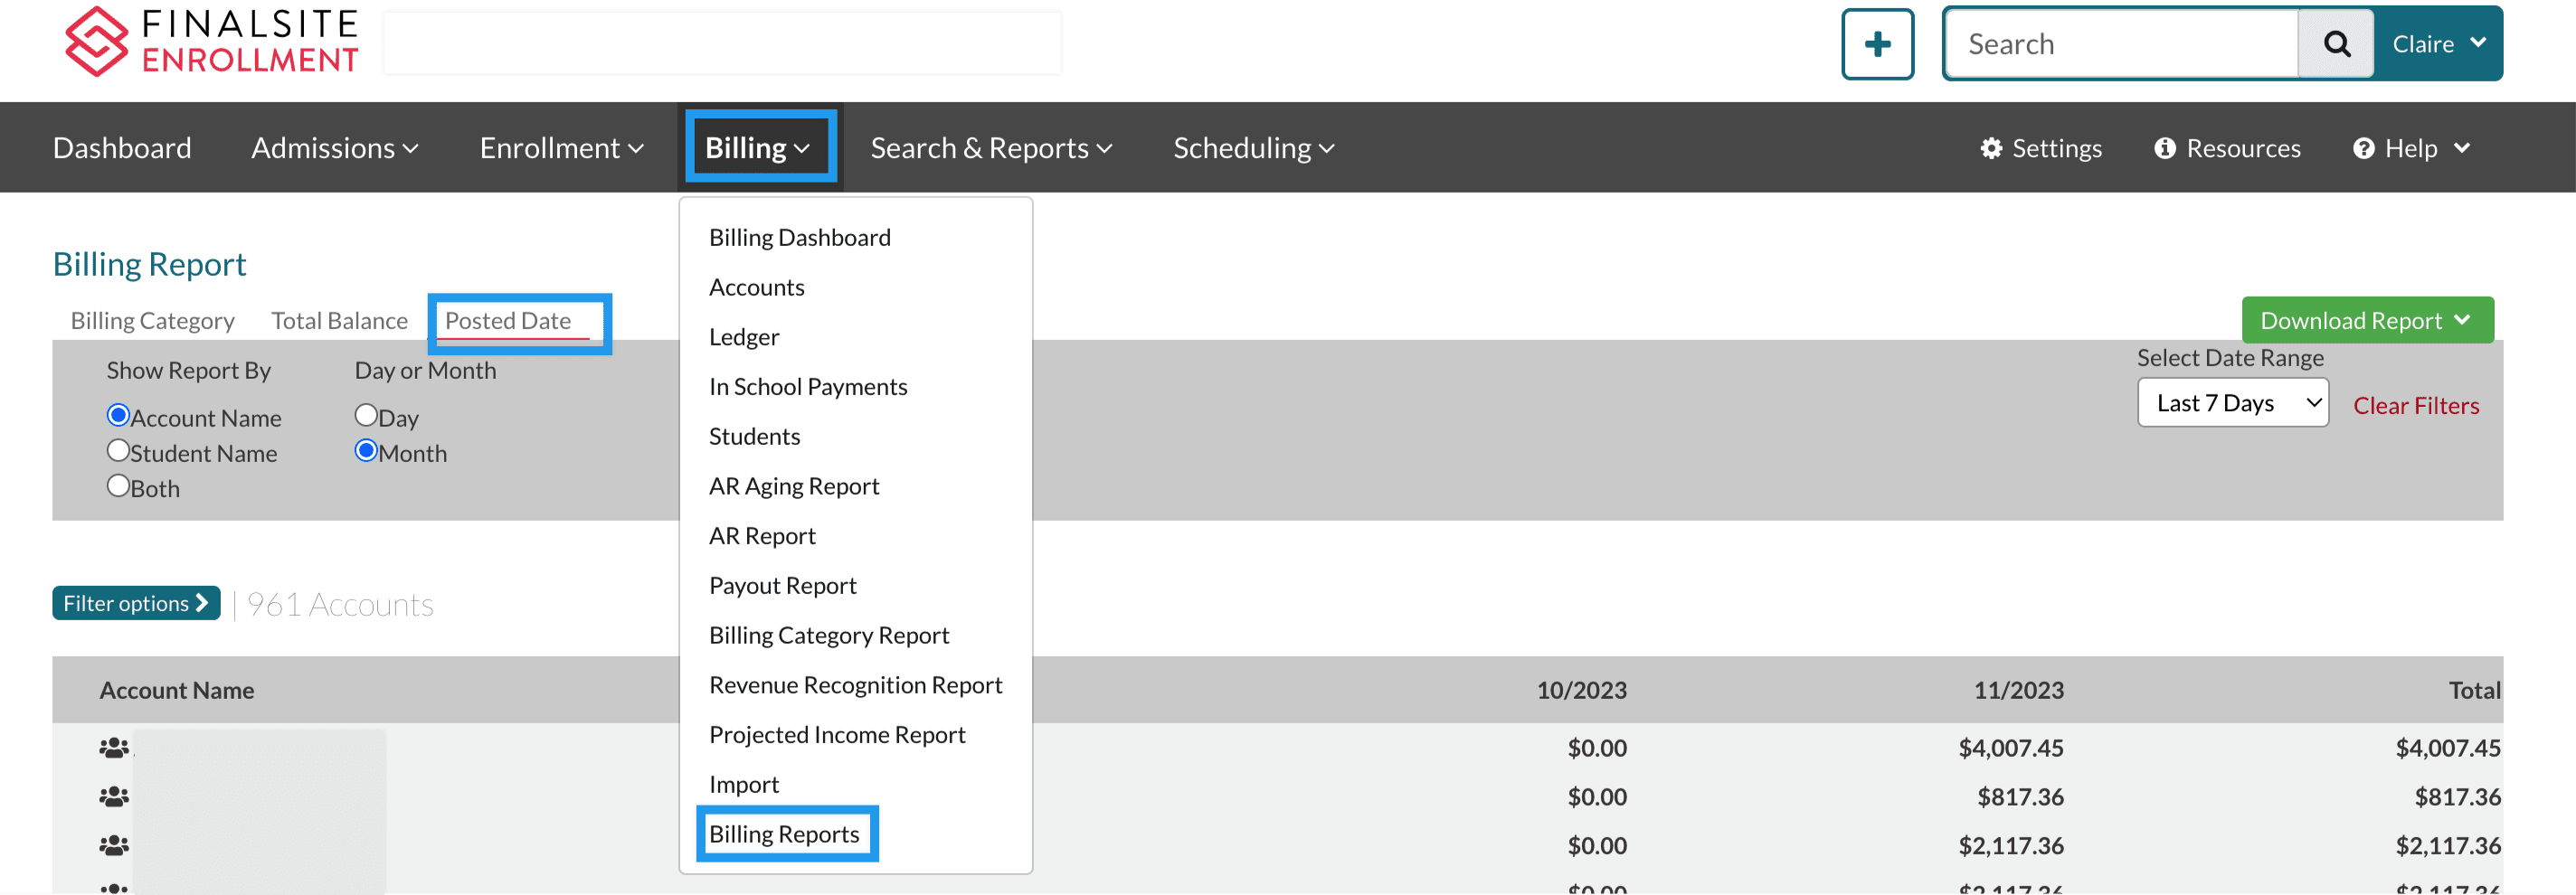 Posted Date Page of the Billing reports pages.